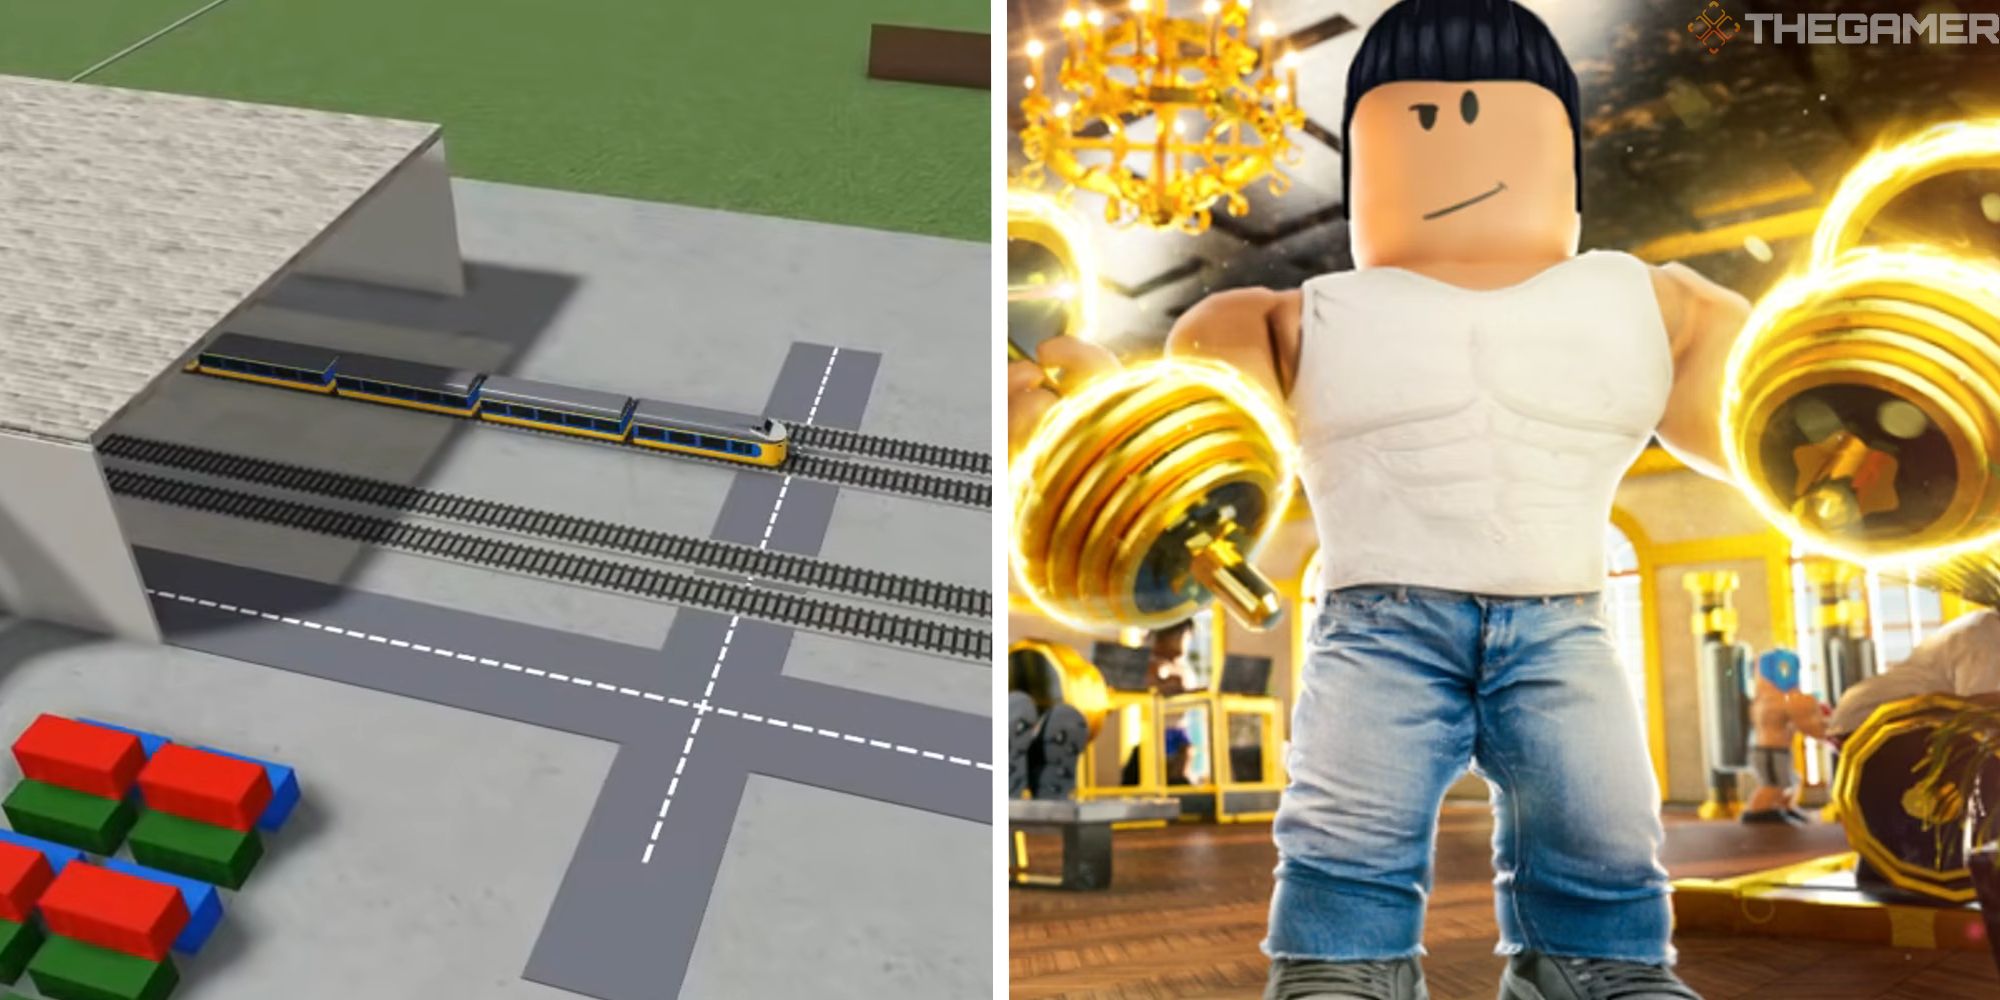 The Best Tycoon Games On Roblox